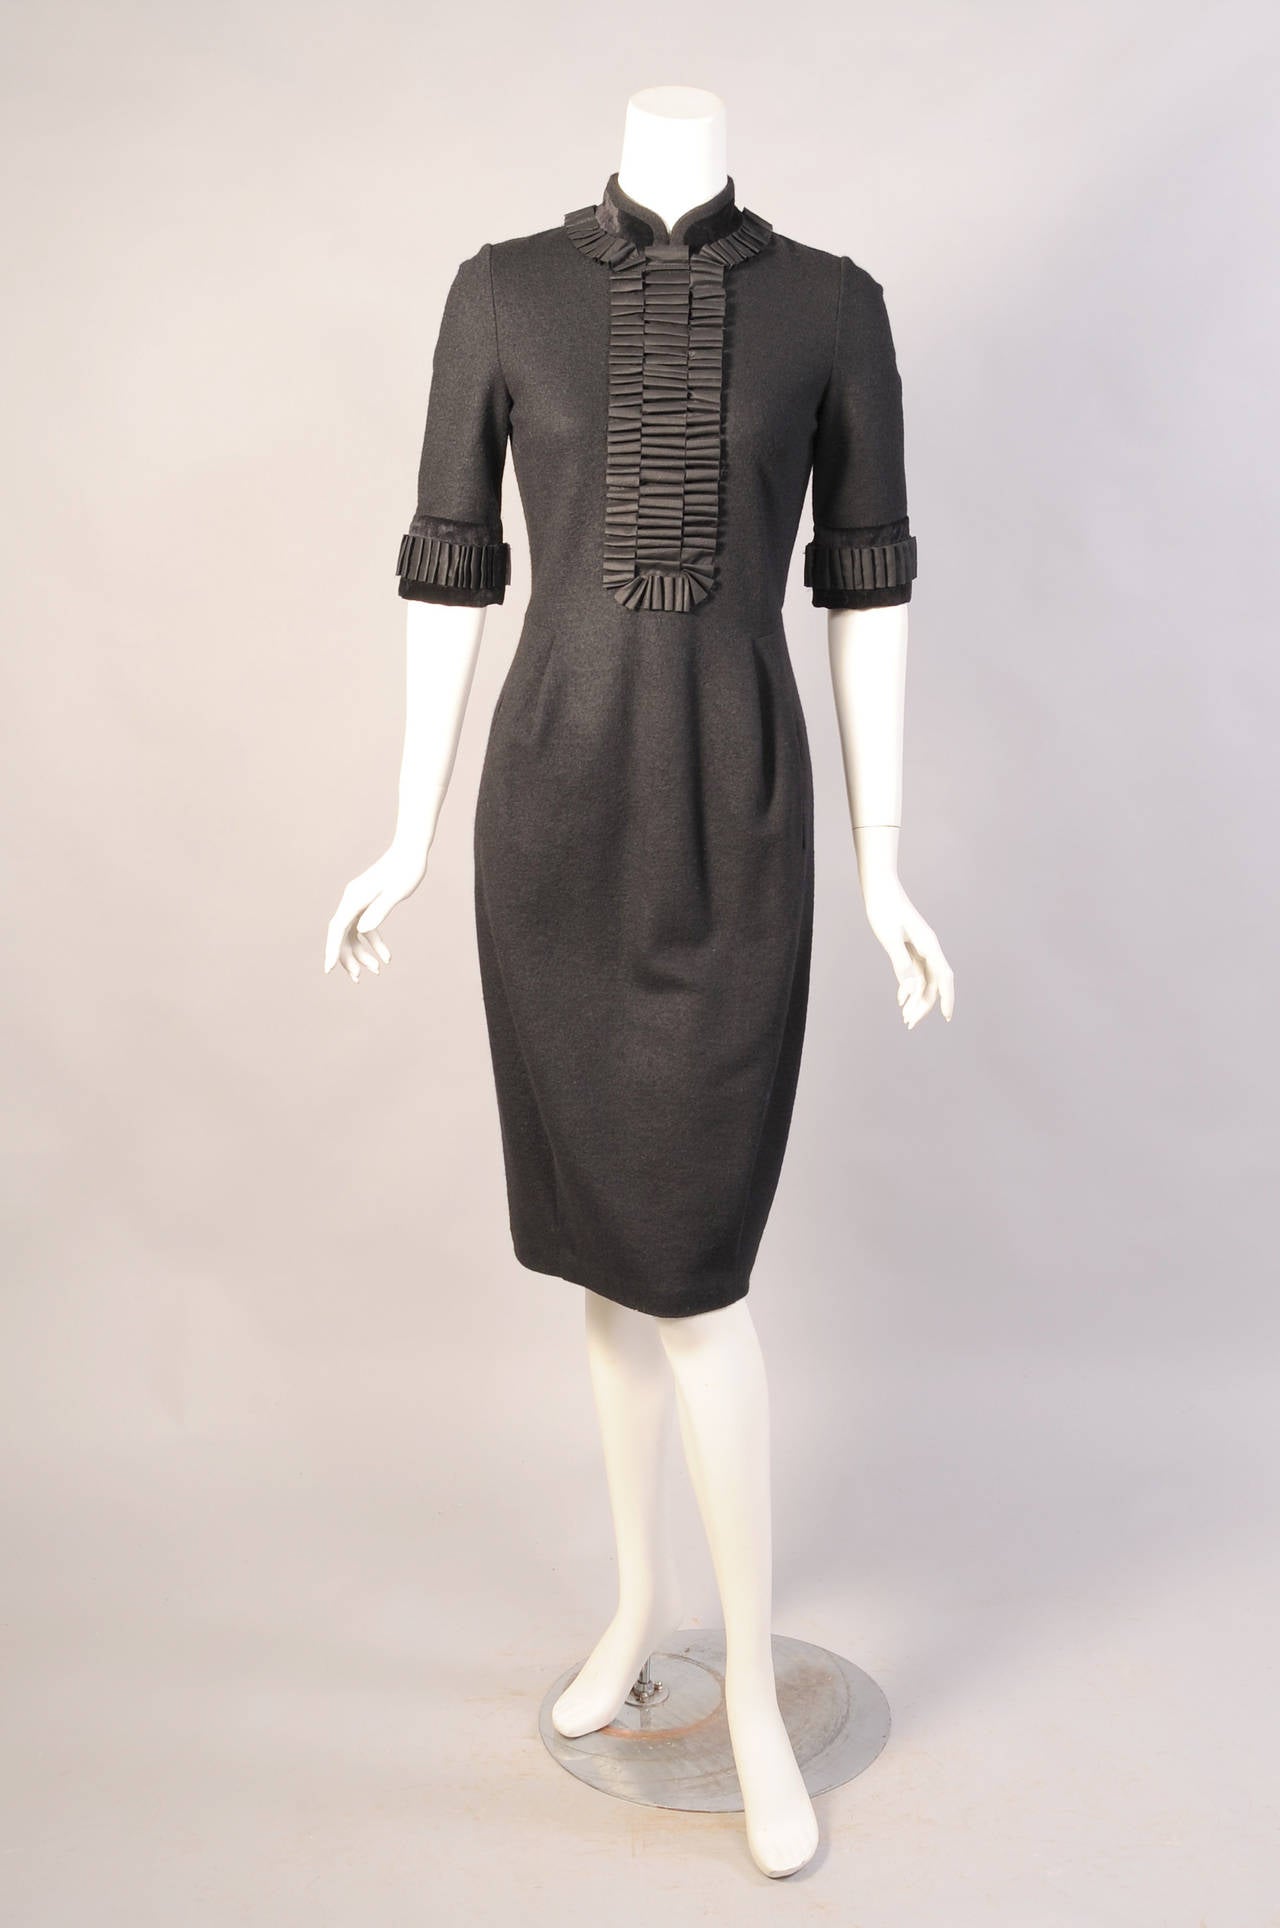 A black velvet collar and cuffs is trimmed with pleated black silk ribbon in the style of a tuxedo shirt. It elevates this black wool dress from Yves Saint Laurent to the next level. The dress has a nipped in waist, two velvet edged pockets and the